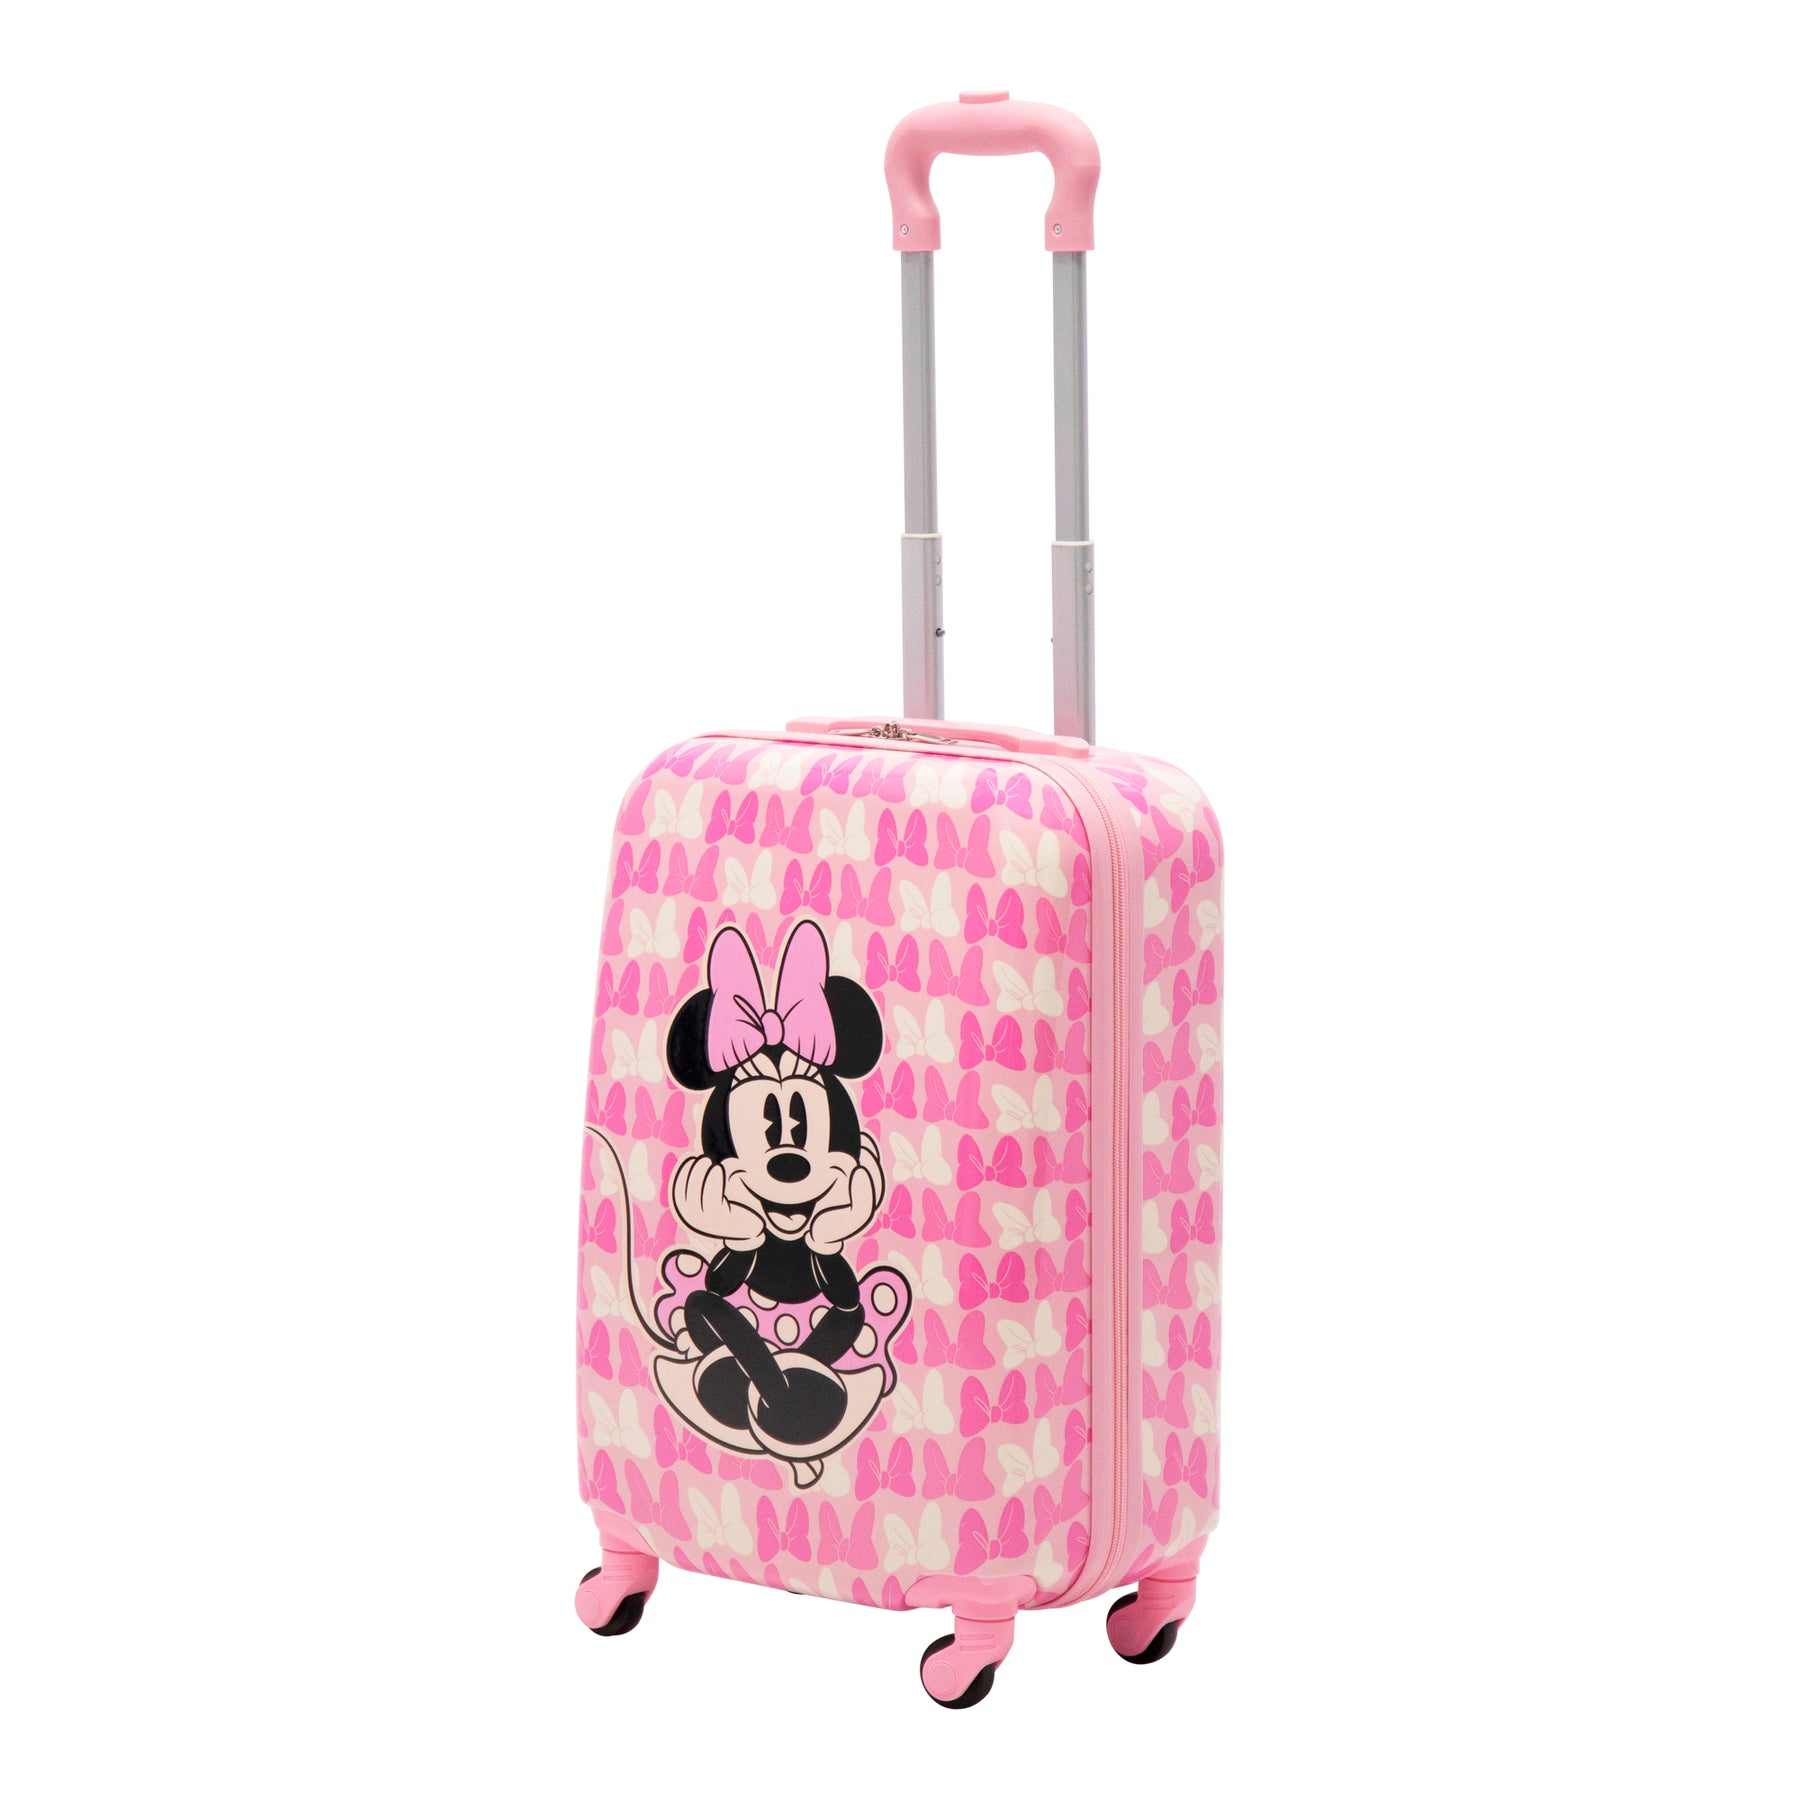 FUL Disney Minnie Mouse Quilted 3D Molded 3 Piece Luggage Set 